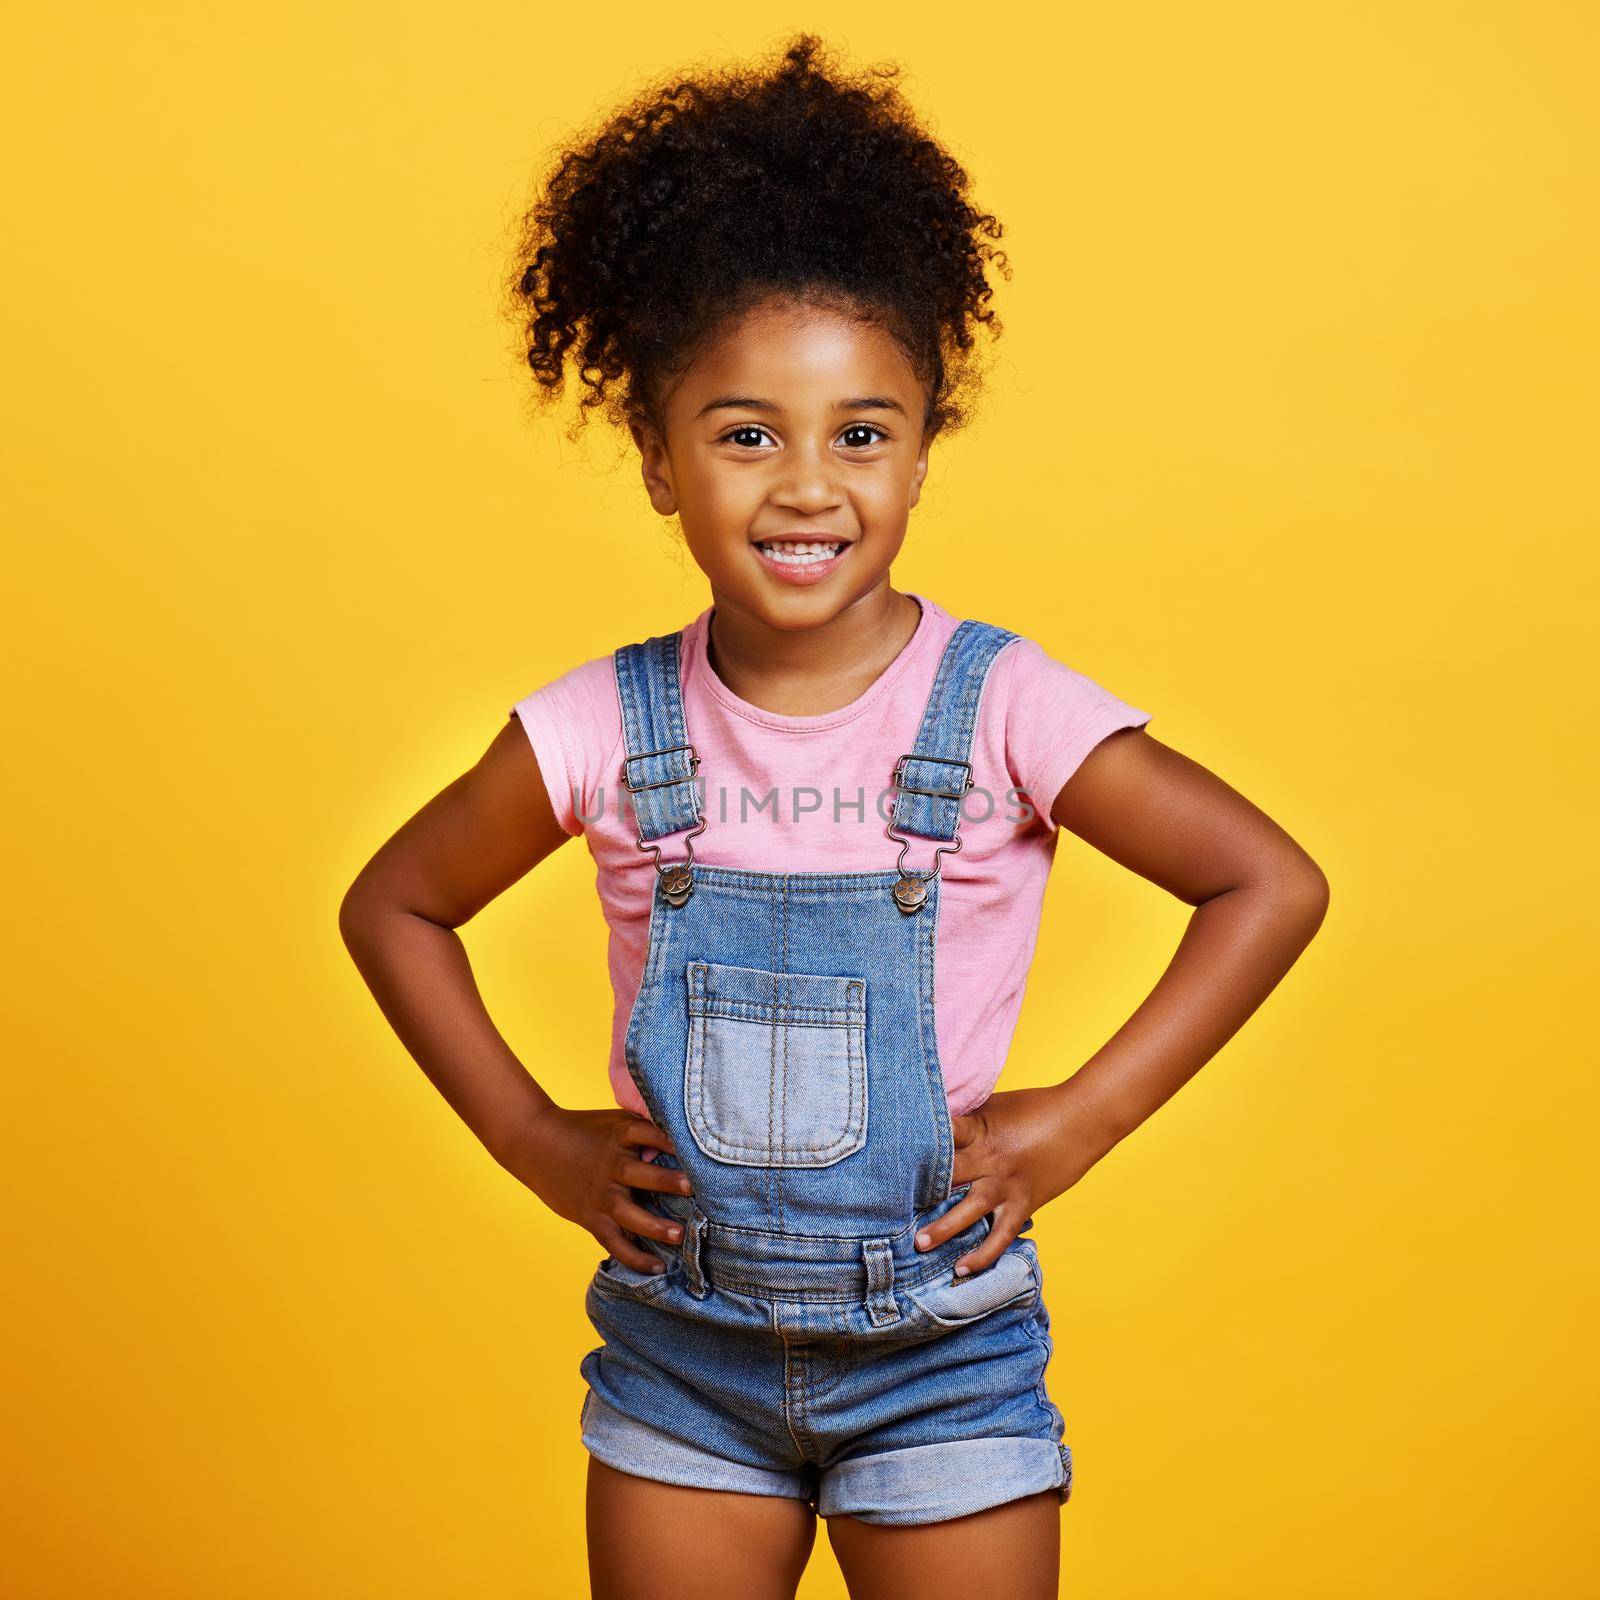 Studio portrait mixed race girl looking standing with her hands on her hips isolated against a yellow background. Cute hispanic child posing inside. Happy and cute kid smiling and looking confident.